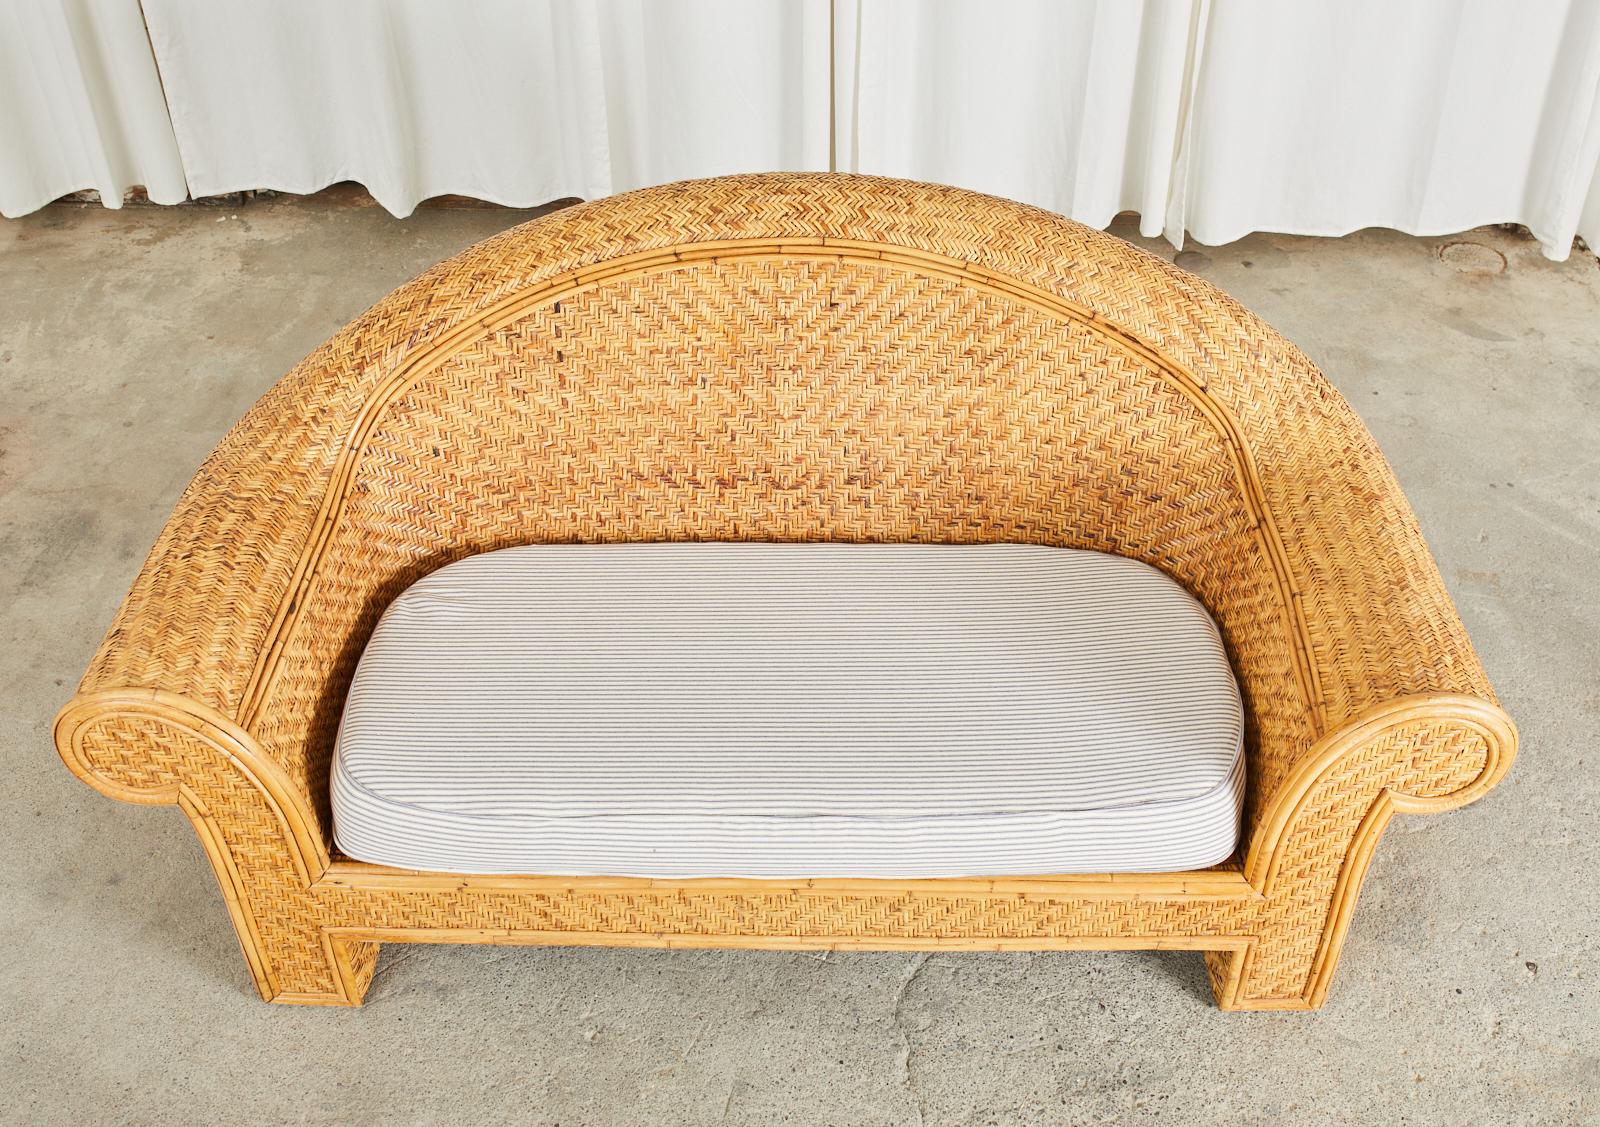 20th Century Ralph Lauren Attributed Woven Rattan Bamboo Sofa Settee For Sale